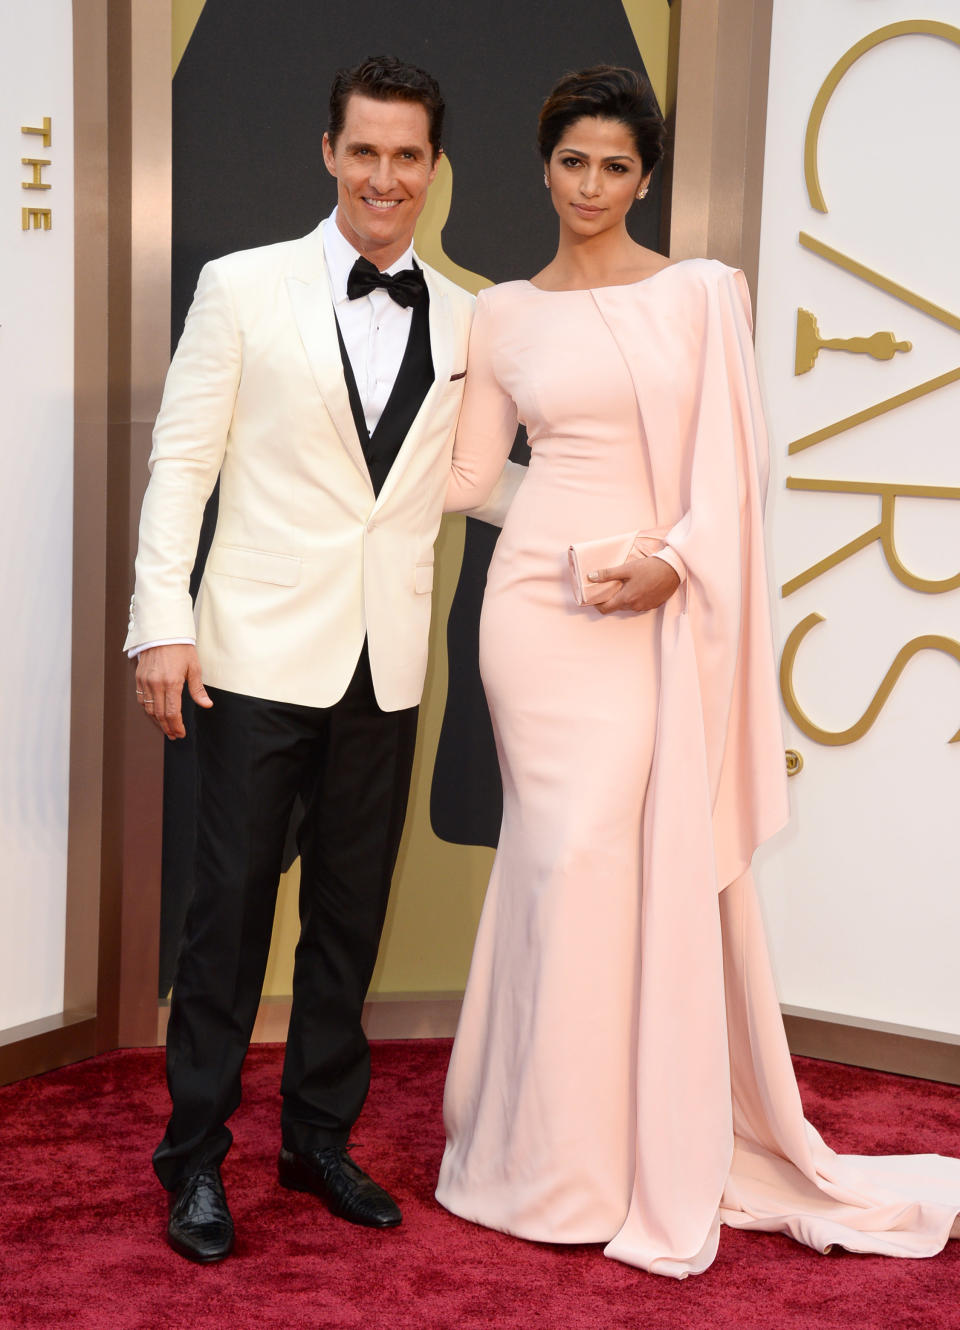 Matthew McConaughey, left, and Camila Alves arrive at the Oscars on Sunday, March 2, 2014, at the Dolby Theatre in Los Angeles. (Photo by Jordan Strauss/Invision/AP)